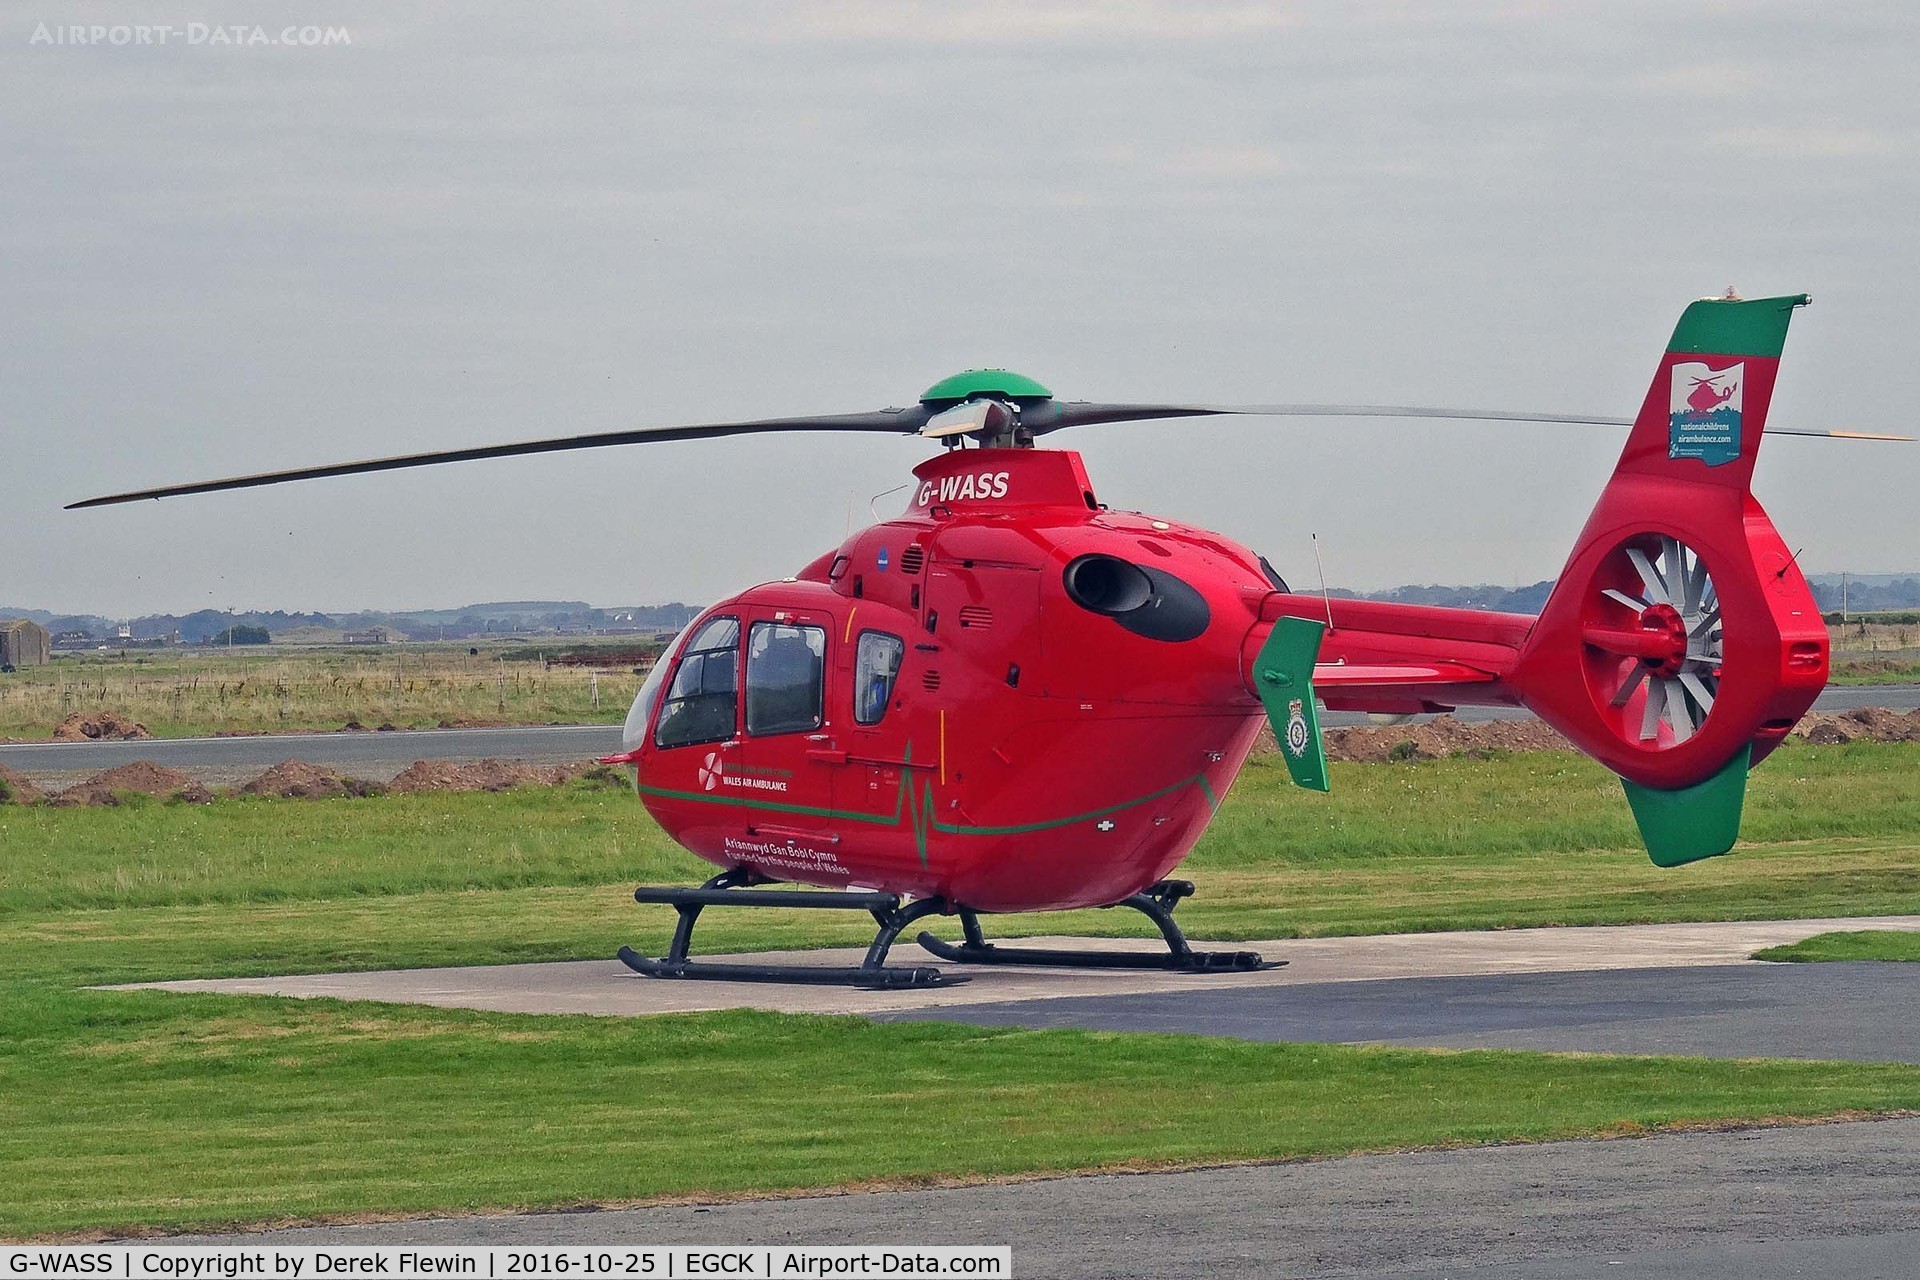 G-WASS, 2009 Eurocopter EC-135T-2+ C/N 0745, EC-135T-2+, Caernarfon based, Wales Air Ambulance, call sign Helimed 61, previously D-HECL, seen parked up.